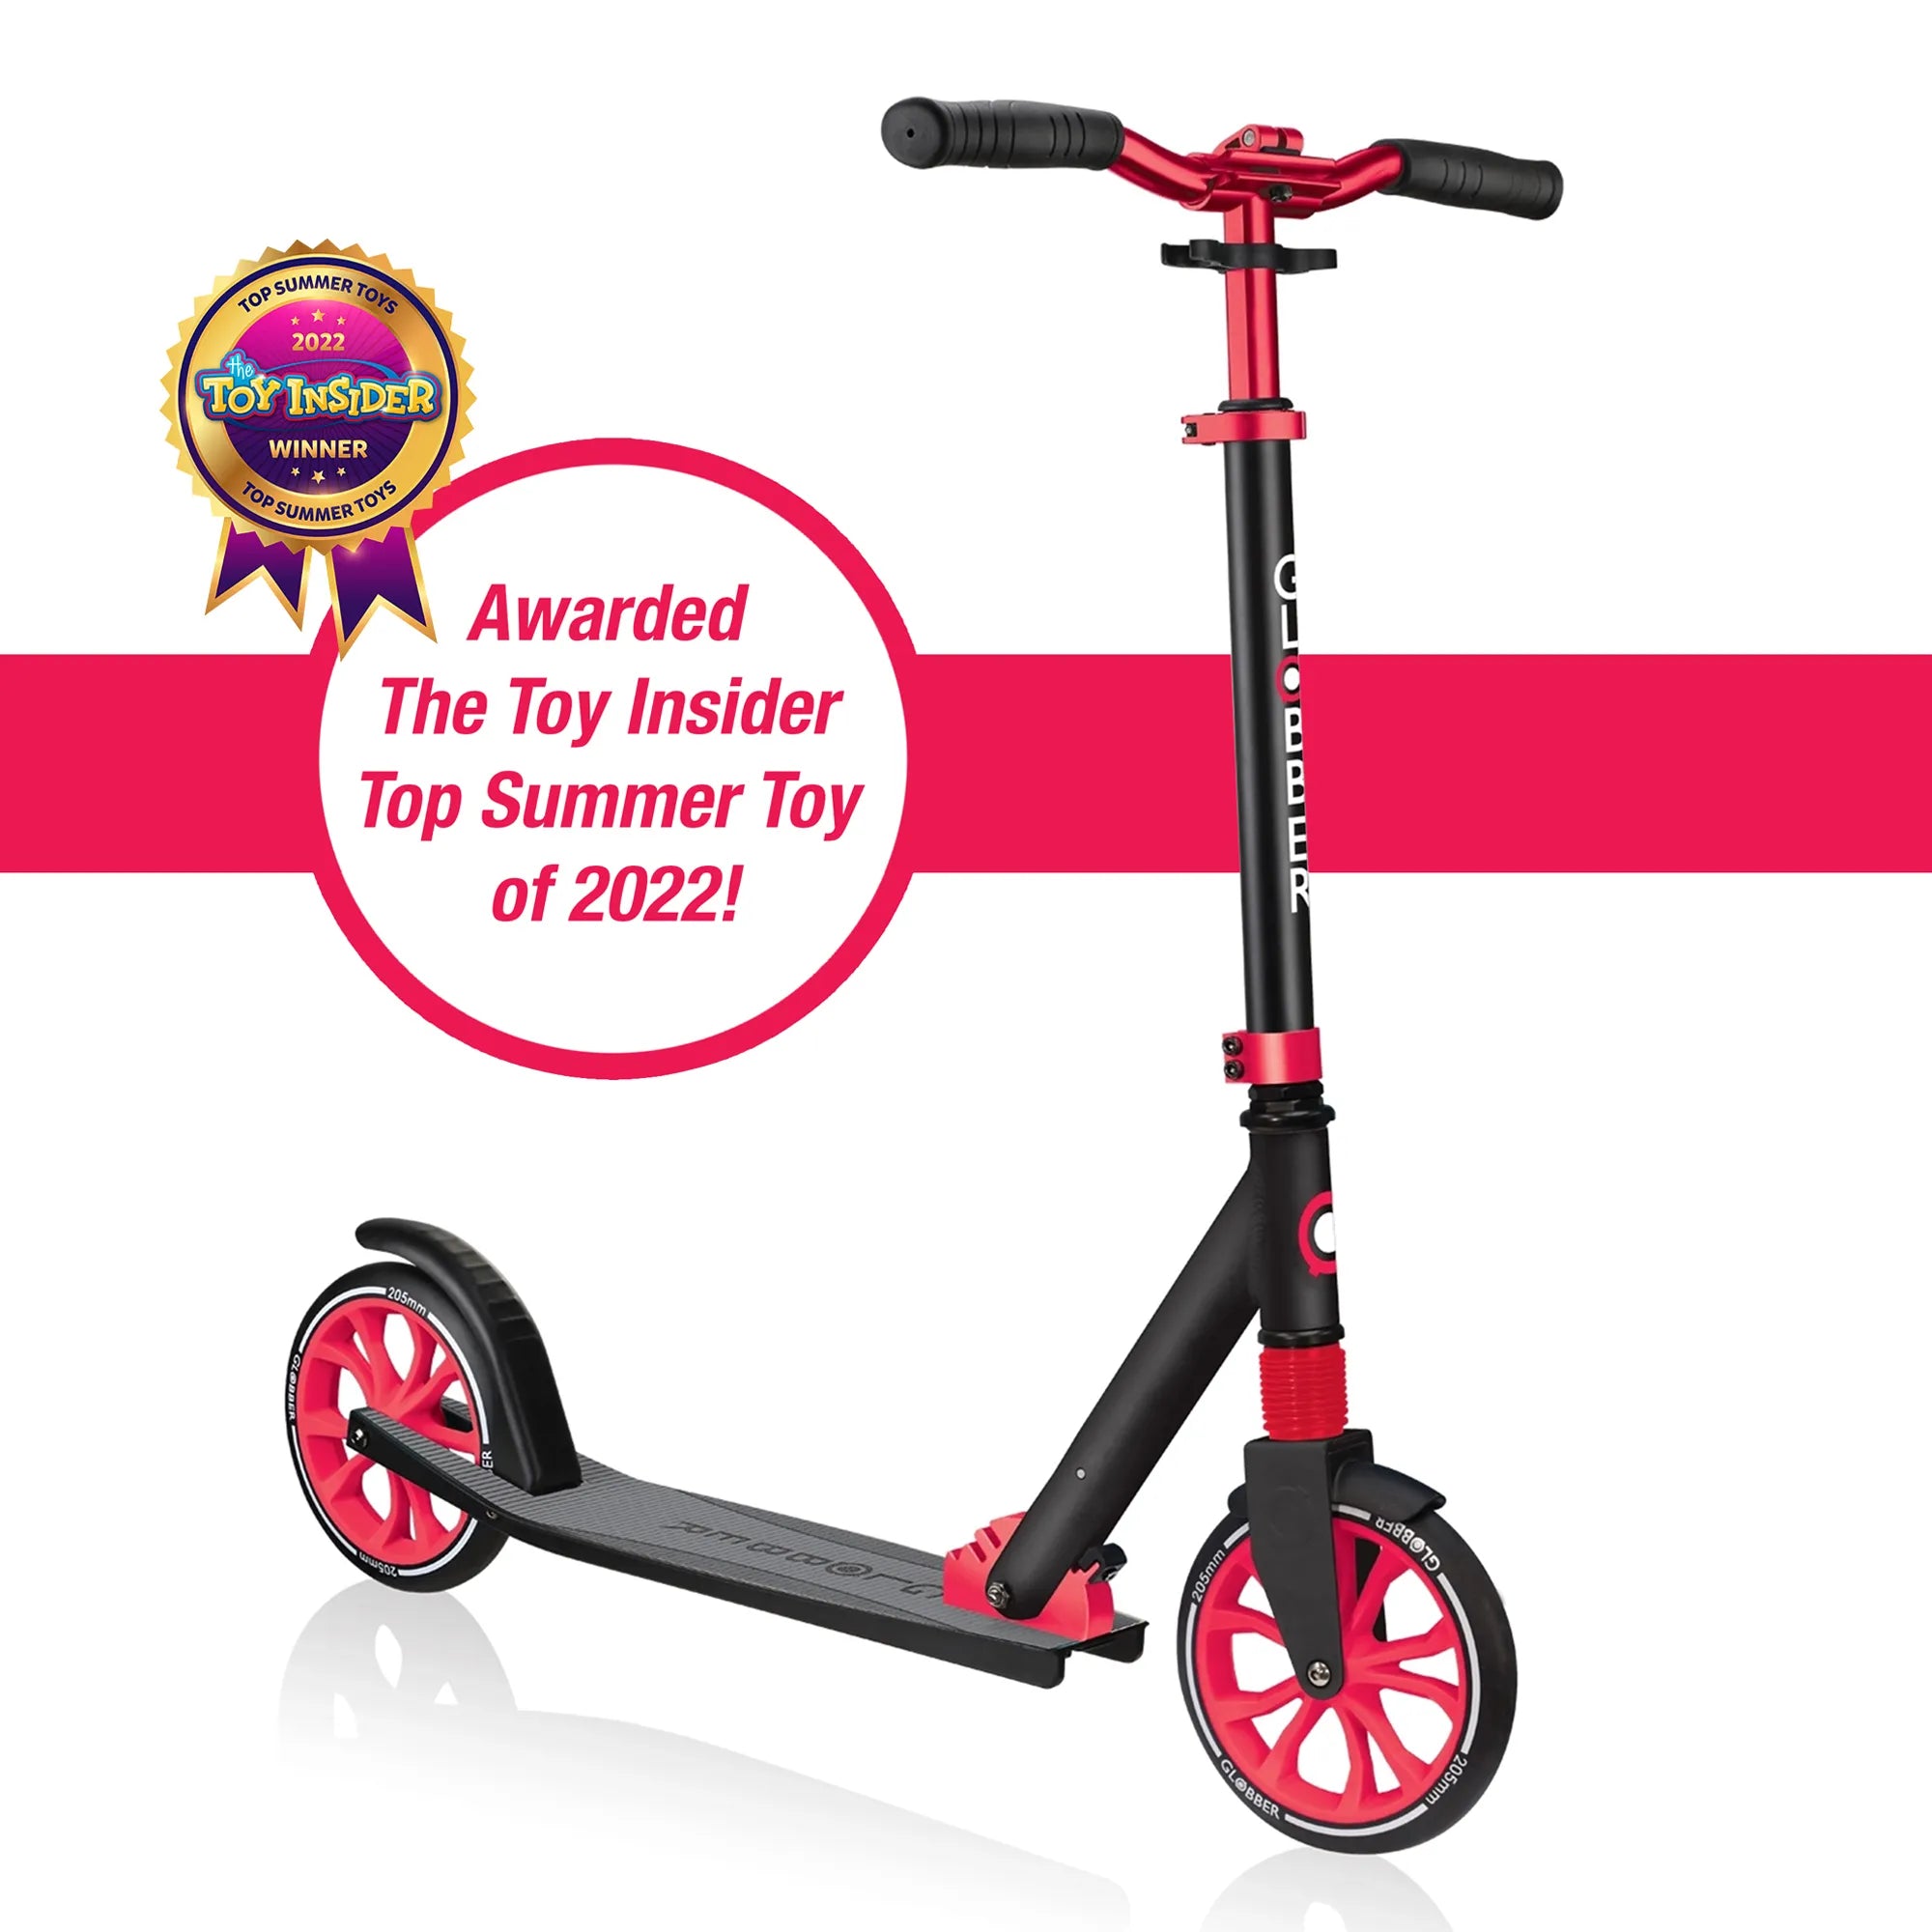 Globber NL 205 - Black & Red - Award-Winning Scooter Ages 8-Adult - Brown's Hobby & Game